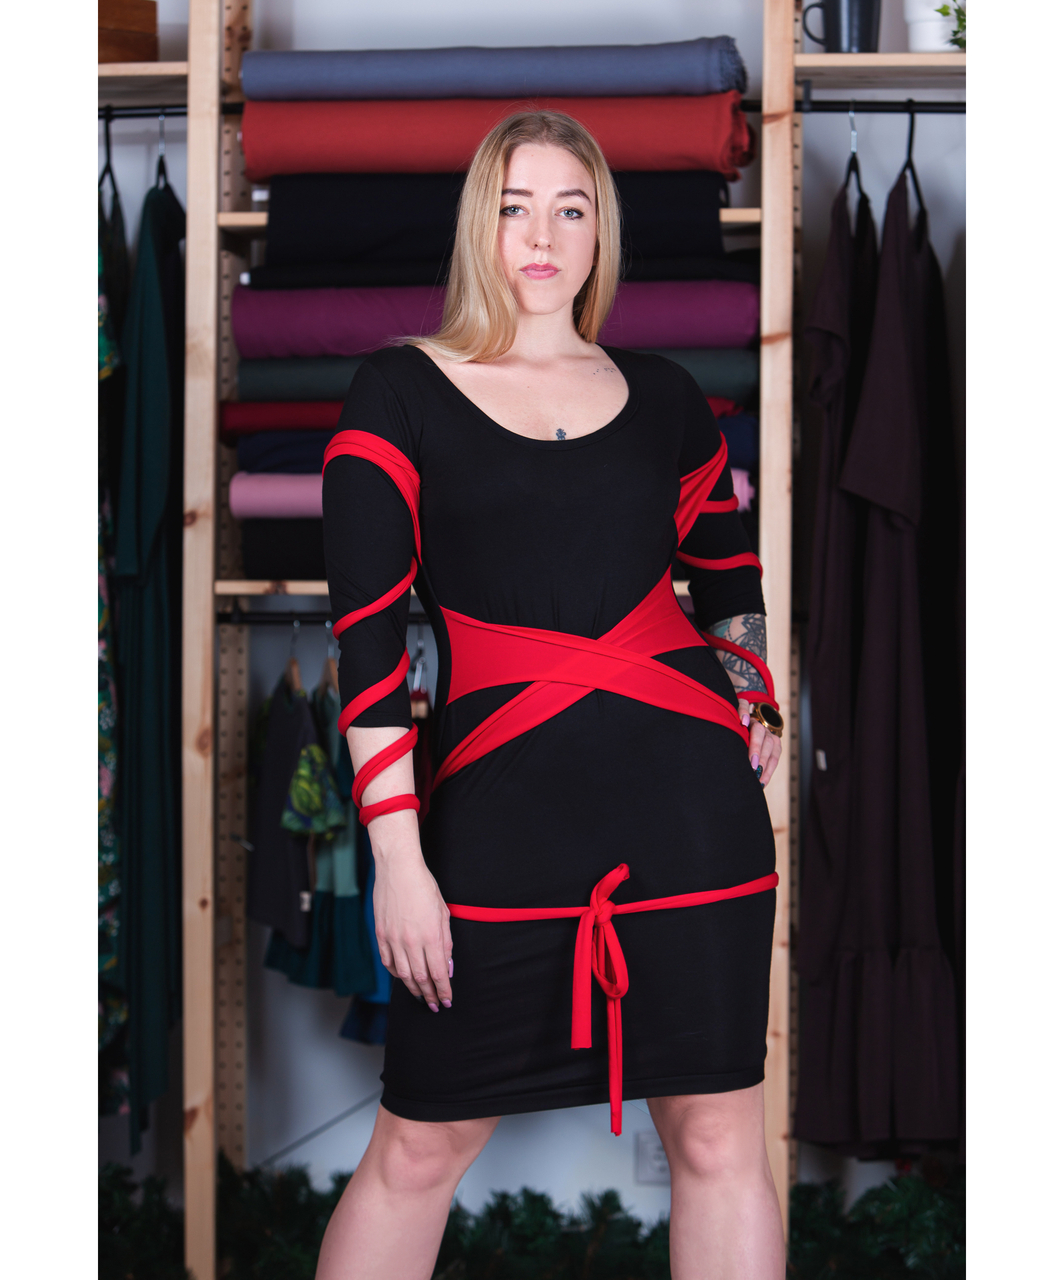 MAKE black tencel dress with sewn-in red sashes